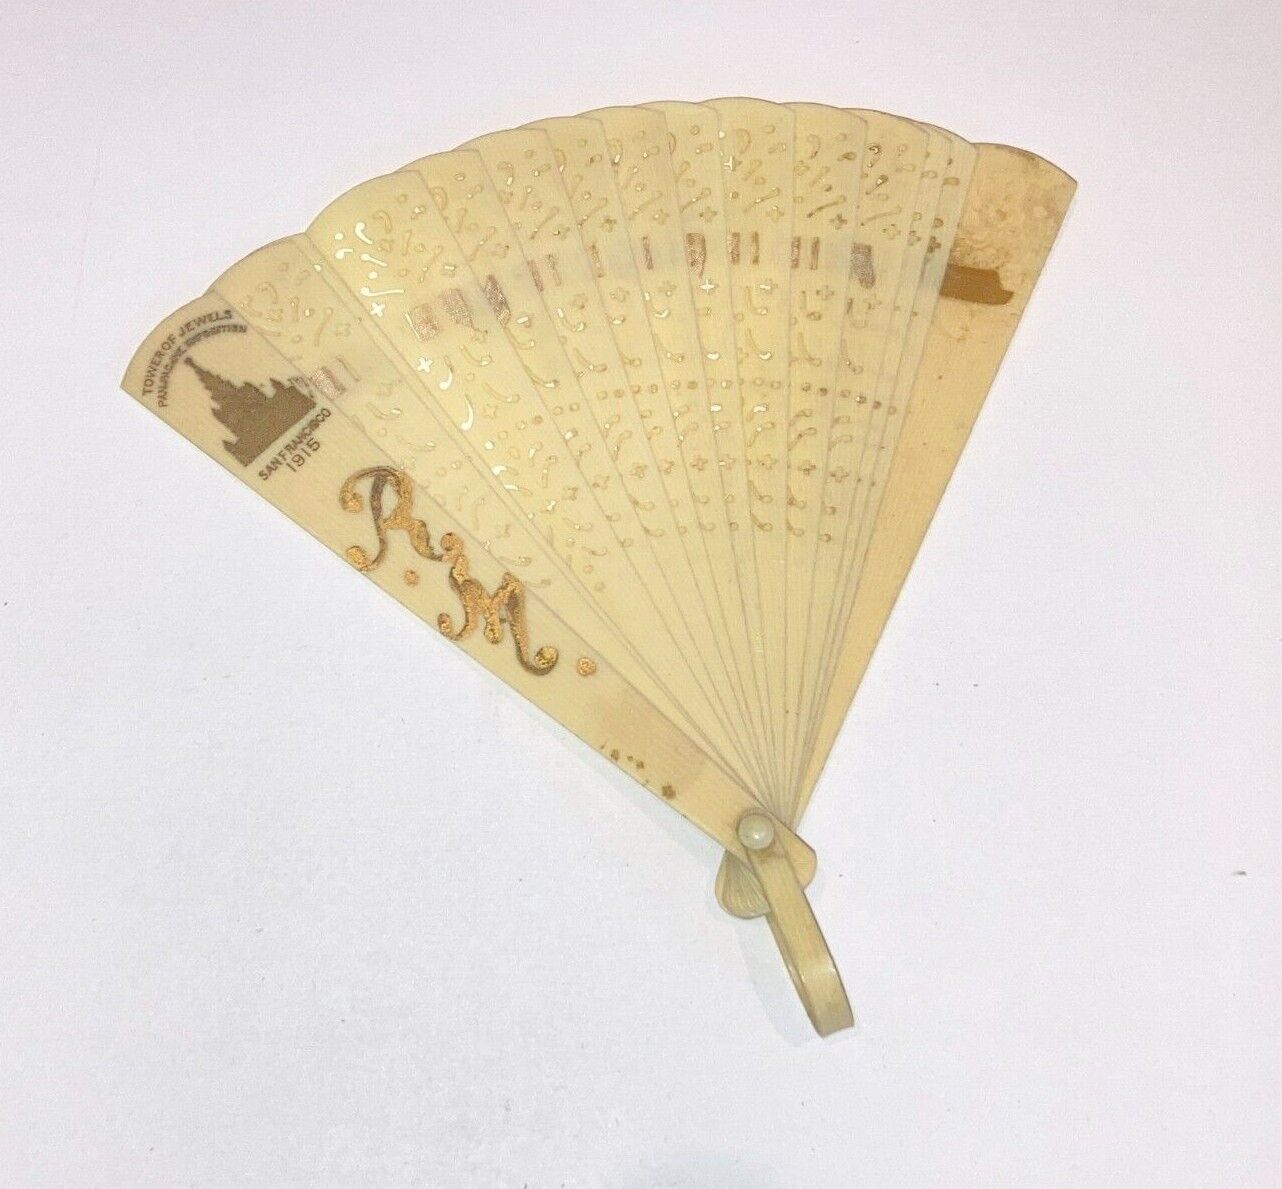 RARE 1915 TOWER OF JEWELS PANAMA PACIFIC EXPOSITION WORLD\'S FAIR CELLULOID FAN